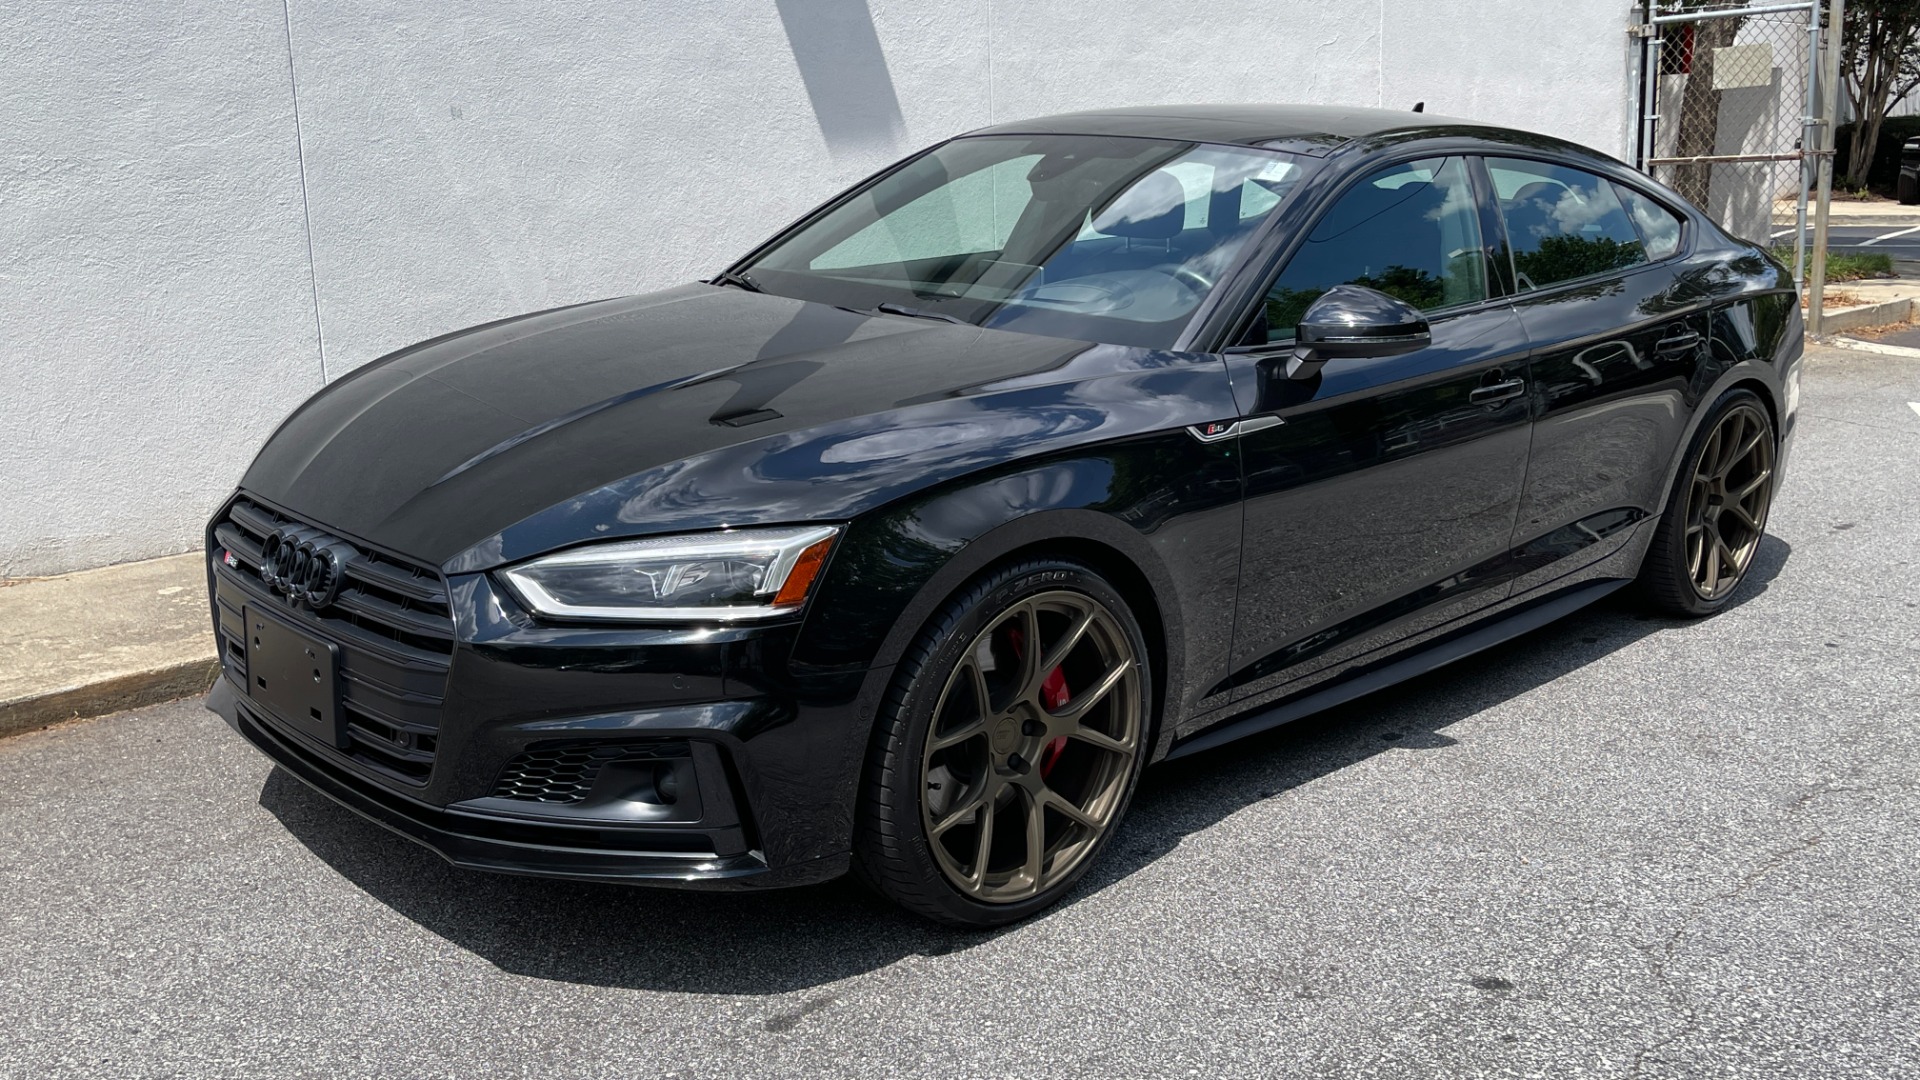 Used 2019 Audi S5 Sportback Prestige / BC FORGED WHEELS / APR INTAKE / APR EXHAUST / CARBON FIBER for sale $51,595 at Formula Imports in Charlotte NC 28227 8